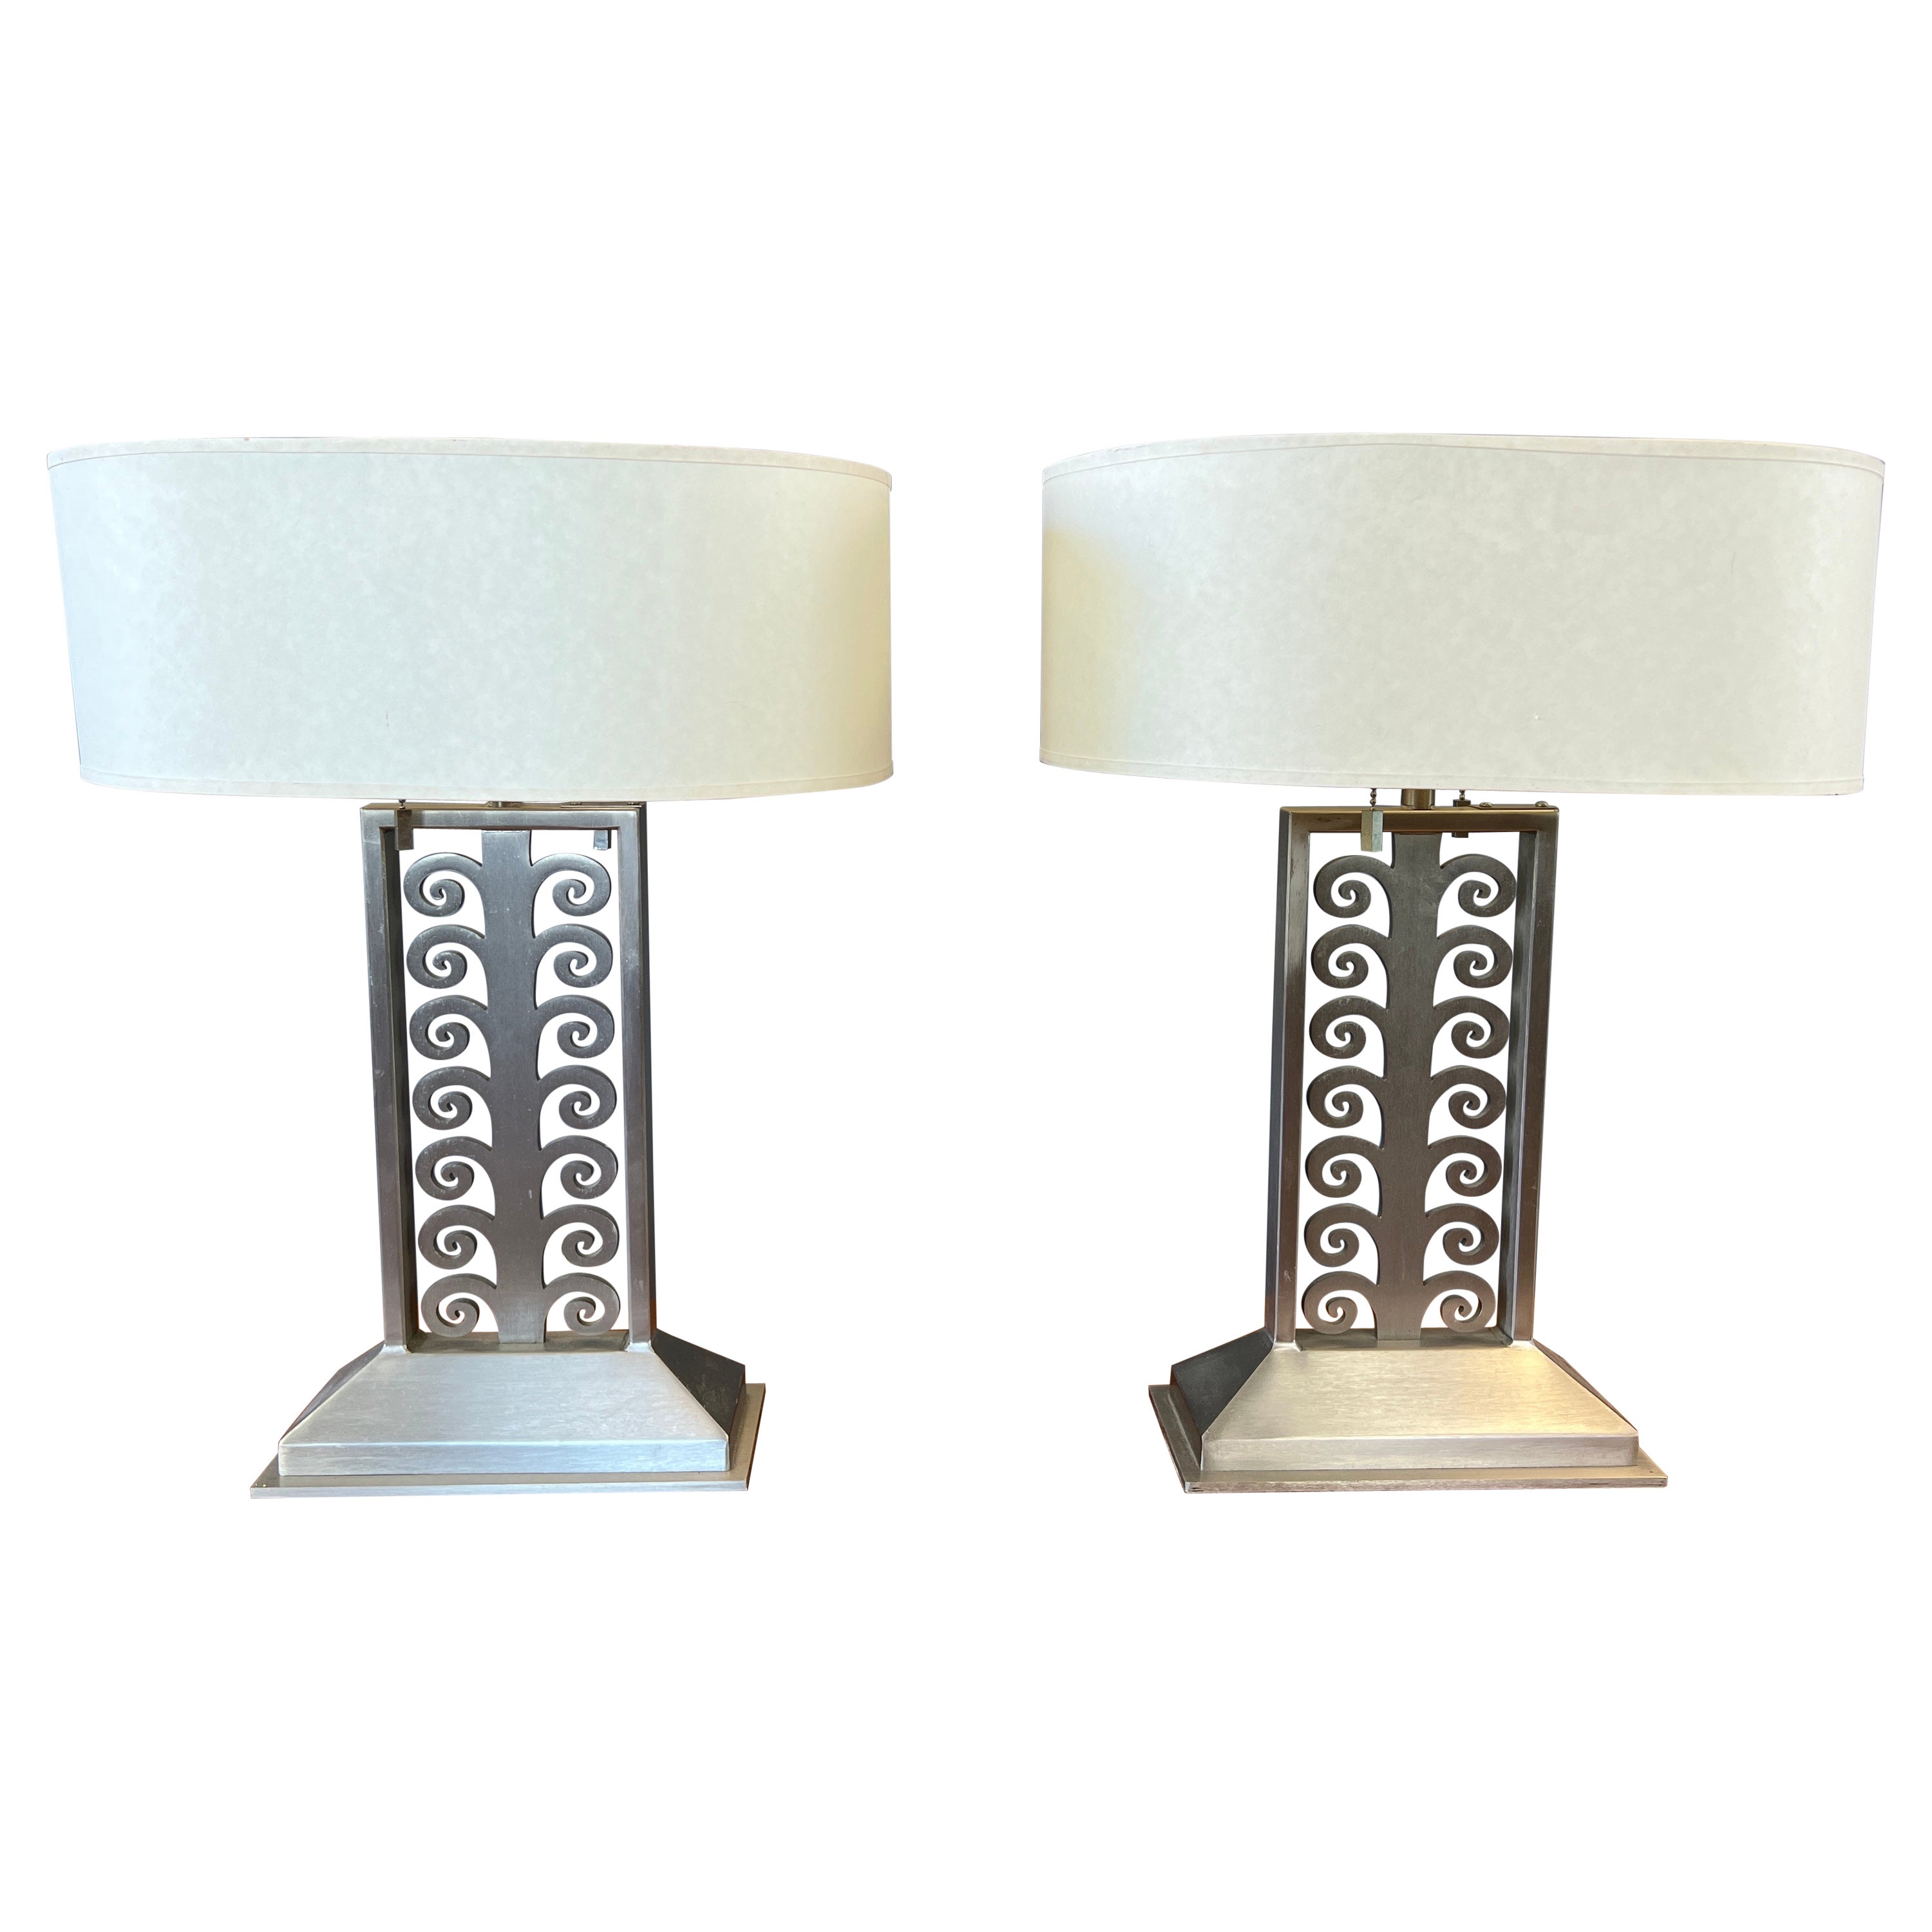 Pair of Sirmos Table Lamps in Brushed Stainless Steel